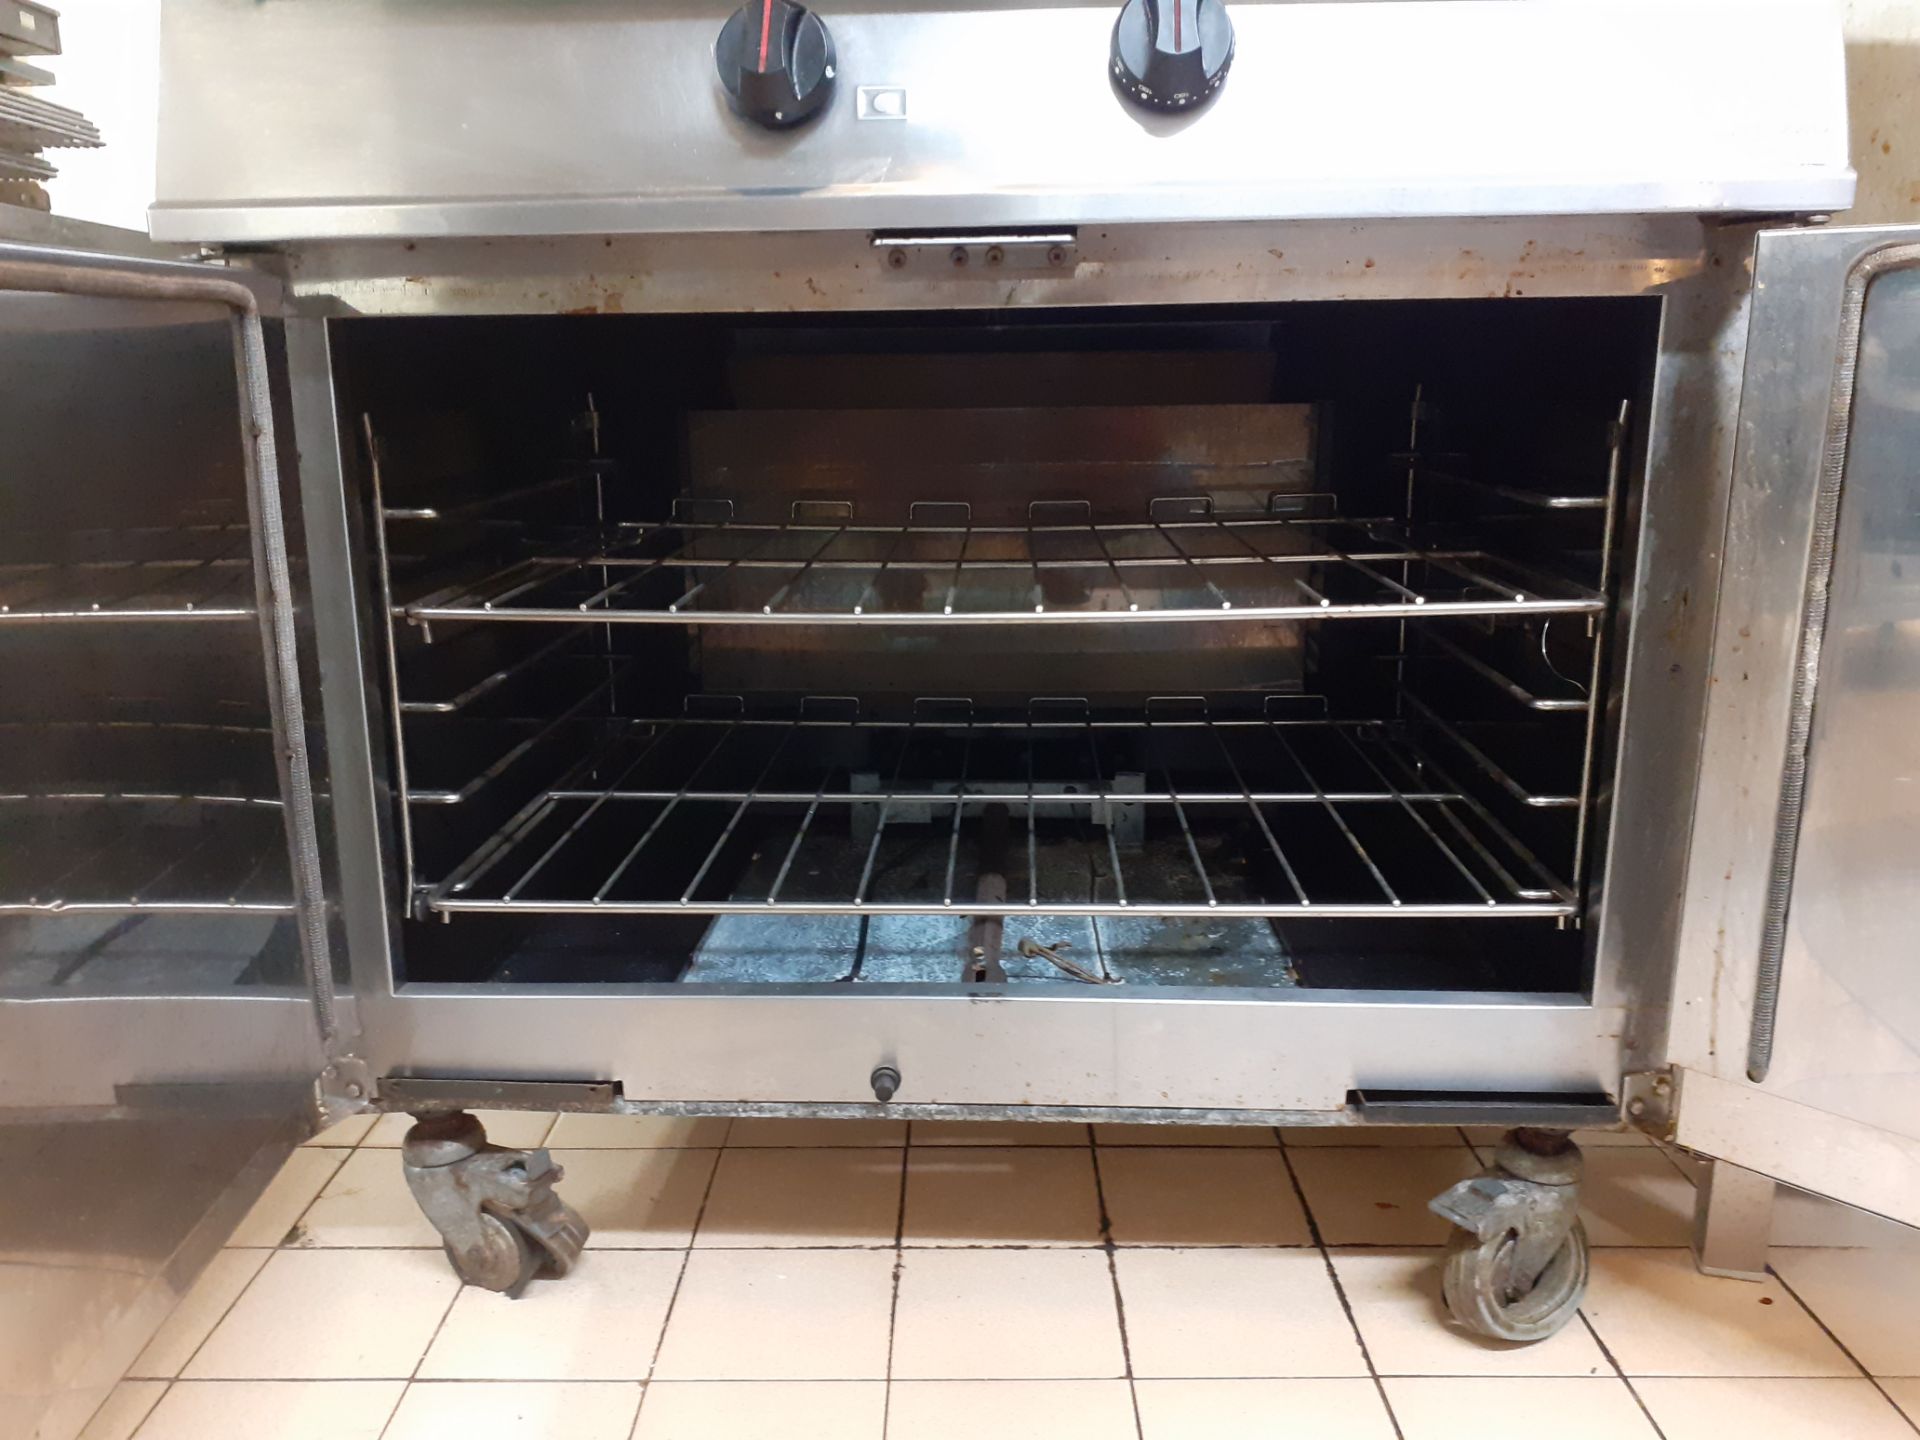 Falcon Dominator Solid Top Gas Range Cooker/Oven with Castors - Image 2 of 2